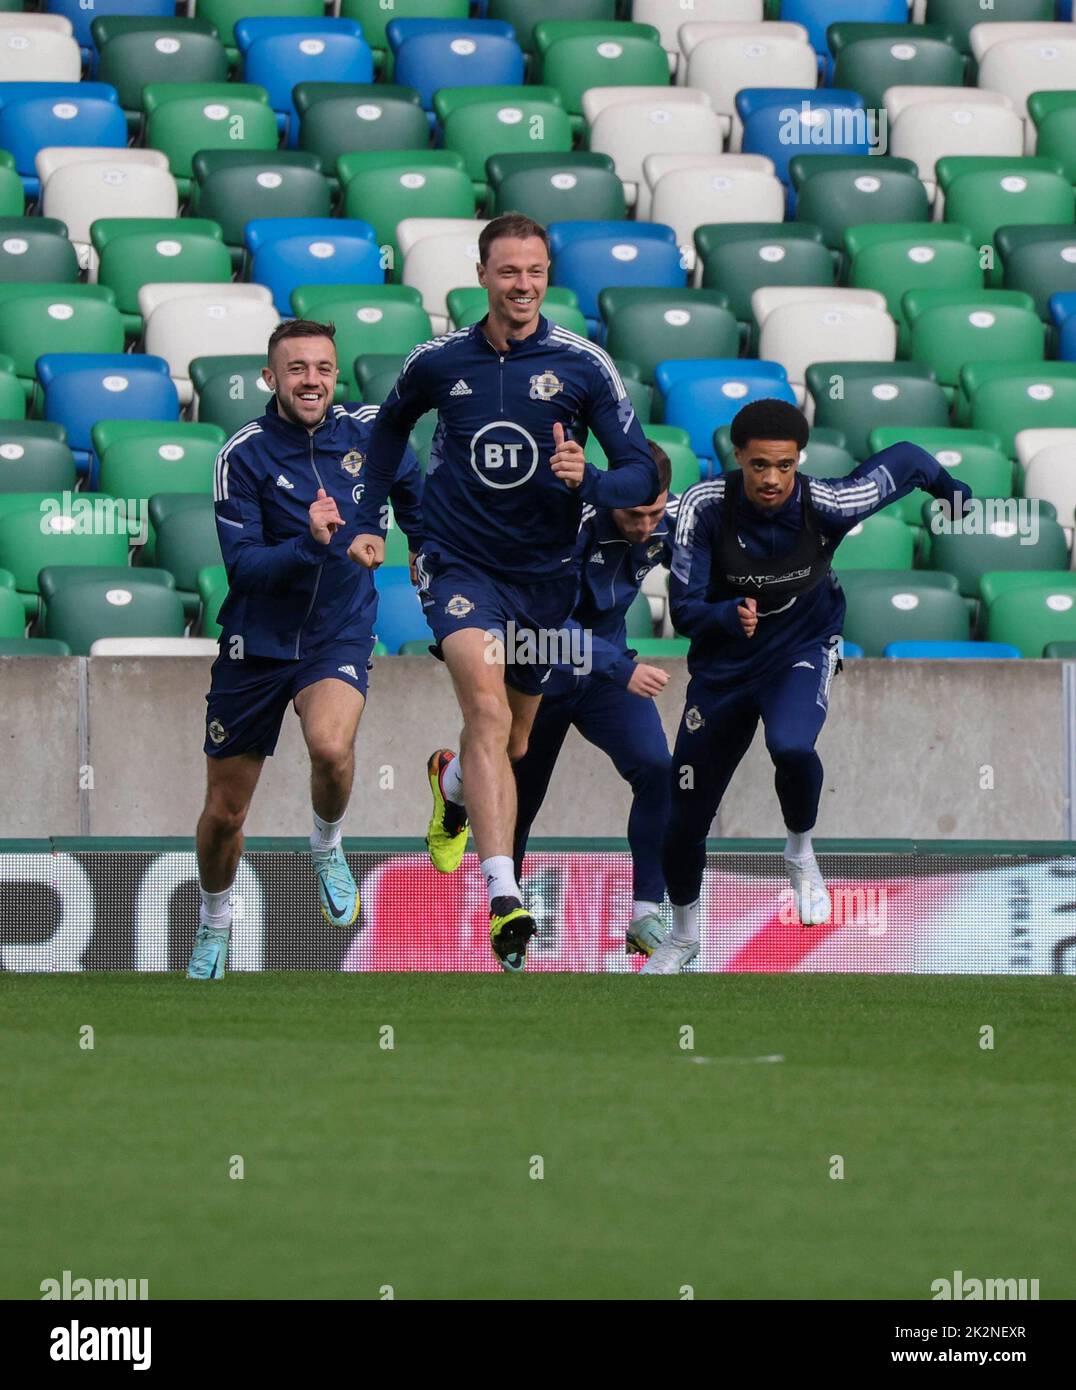 National Football Stadium at Windsor Park, Belfast, Northern Ireland, UK. 23 Sep 2022. The Northern Ireland squad train ahead of tomorrow evening's game against Kosovo. Jonny Evans leads the way with Conor McMenamin (left) and Jamal Lewis 9right). Credit: David Hunter/Alamy Live News. Stock Photo